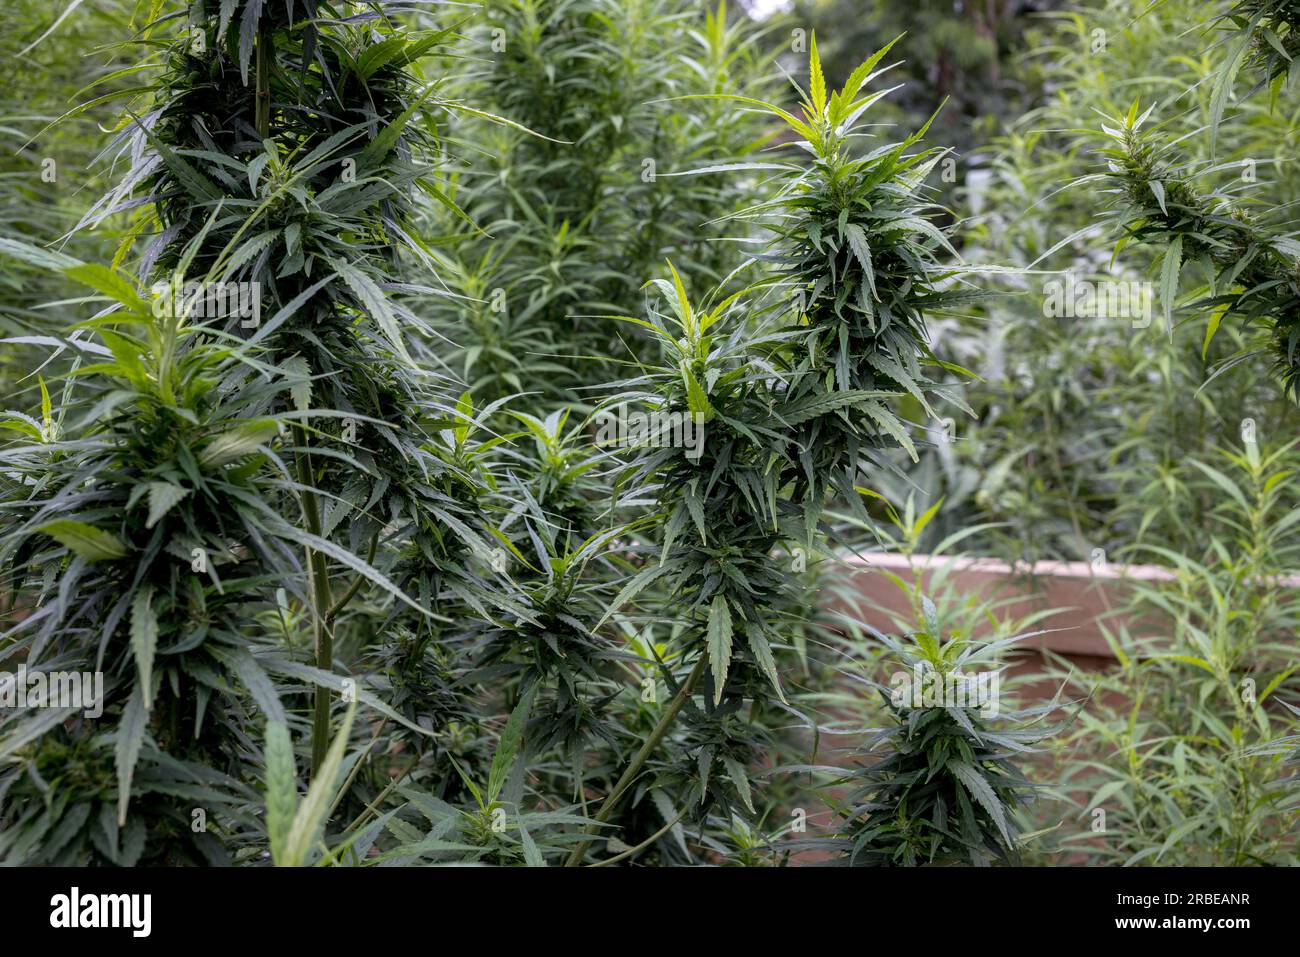 https://c8.alamy.com/comp/2RBEANR/cannabis-plants-with-buds-grow-at-a-small-scale-marijuana-farm-in-mae-hong-song-northern-thailand-on-july-9-2023-2RBEANR.jpg